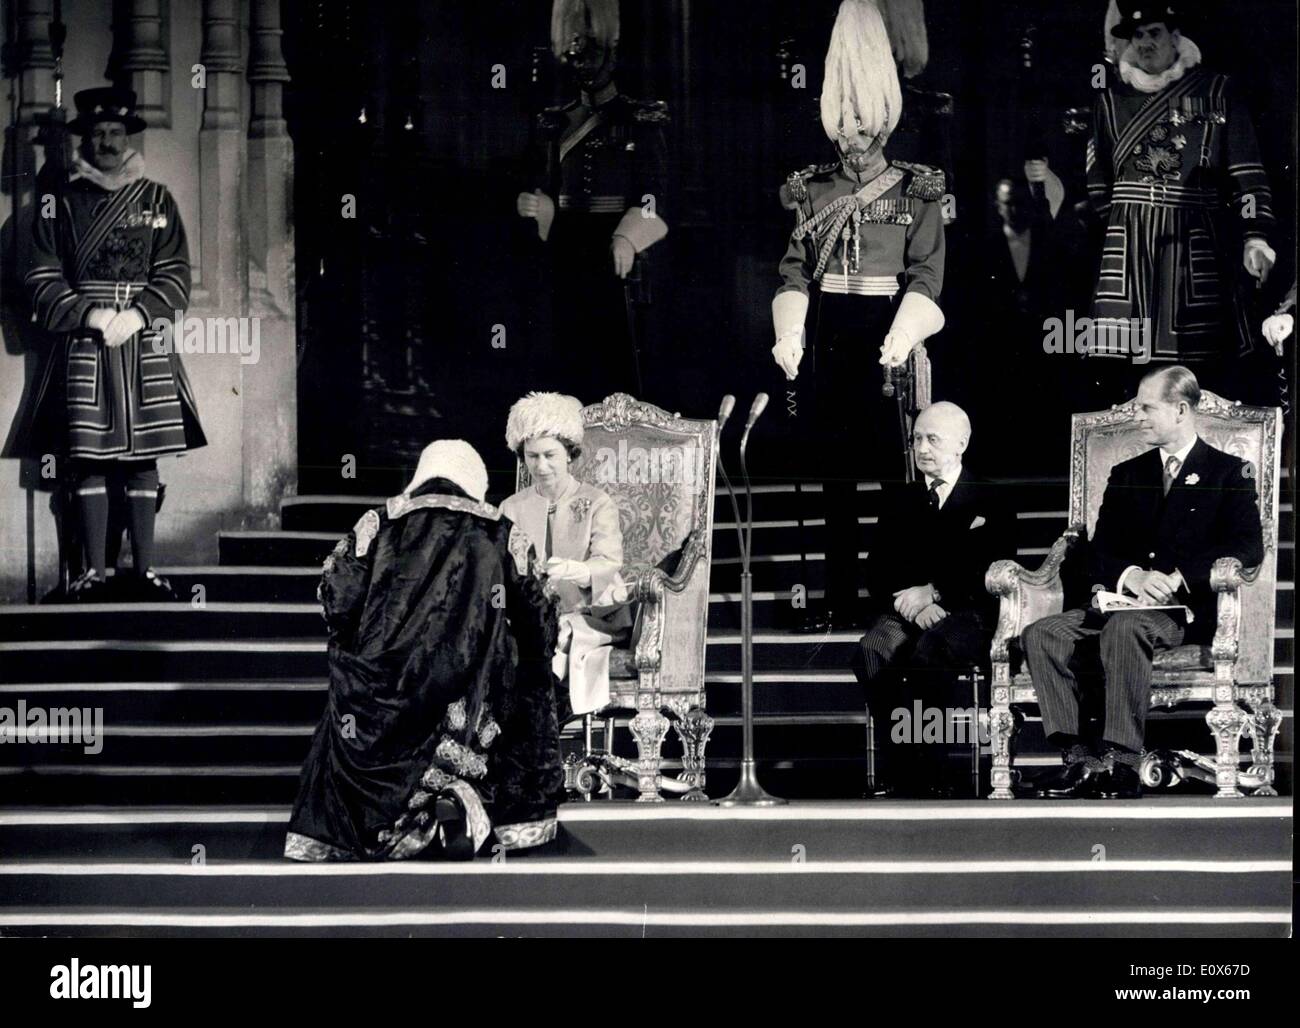 Jun. 22, 1965 - The Queen attends the 700th anniversary of Parliament: In the flower-decked Westminster Hall today H.M. The Queen, and other members of the Royal Family, attended a ceremony to mark the 700th anniversary of Parliament. Simon de Montfort, Earl of Leicester, convened the first Parliament which sat between 20th January and the end of March, 1265, in the Chapter House of Westminster. Photo shows the scene as Sir Harry Hylton-Foster, Speaker of the House of Commons, presents his speech to H.M Stock Photo